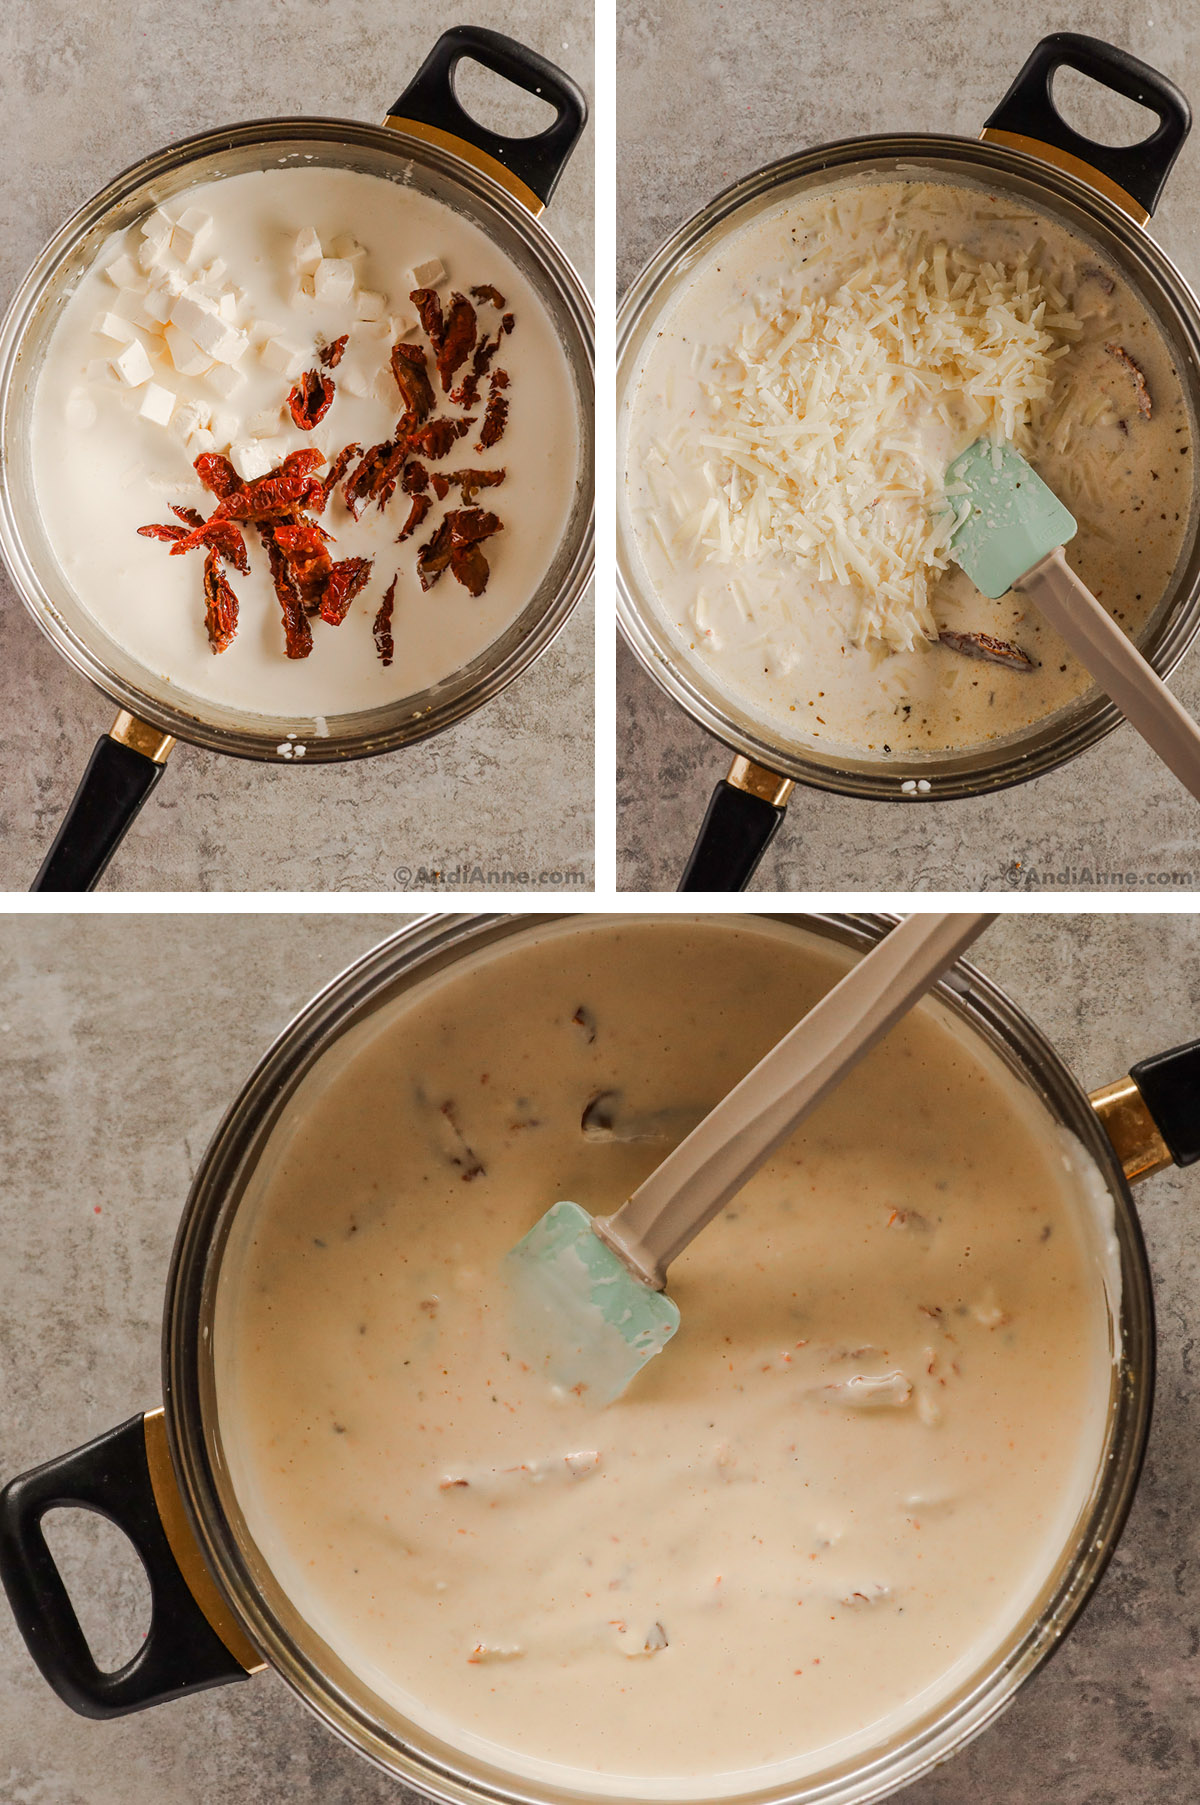 Cream, cream cheese, parmesan cheese and sundried tomatoes in a pot, then mixed to create a creamy thickened sauce.